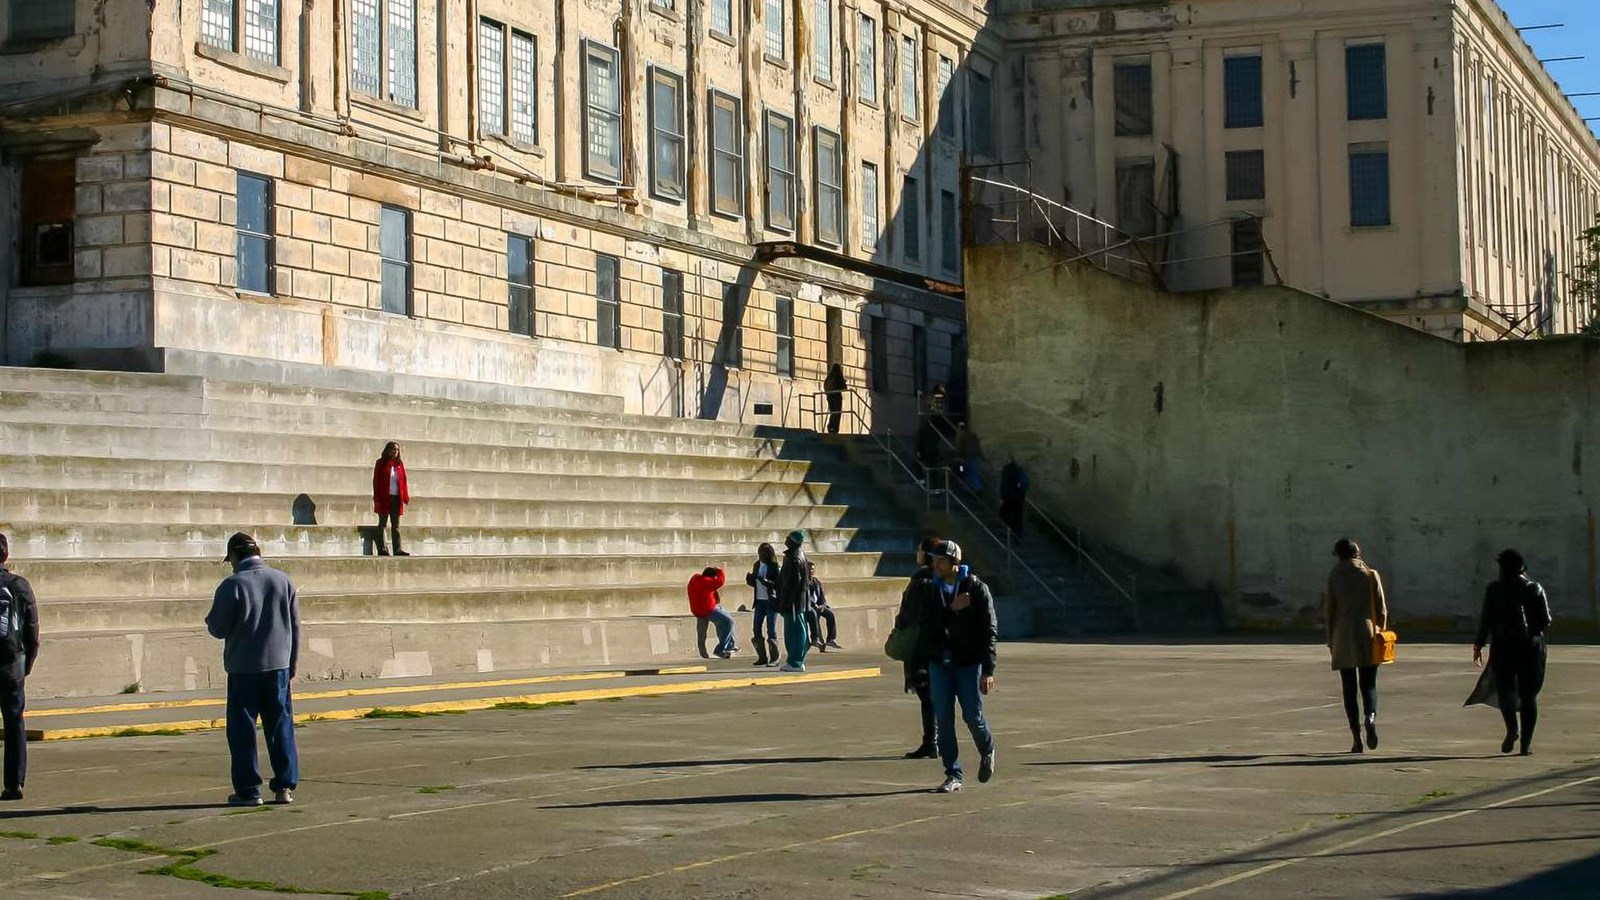 Visitors walking across the concrete recreation yard with steep wide stairs. 